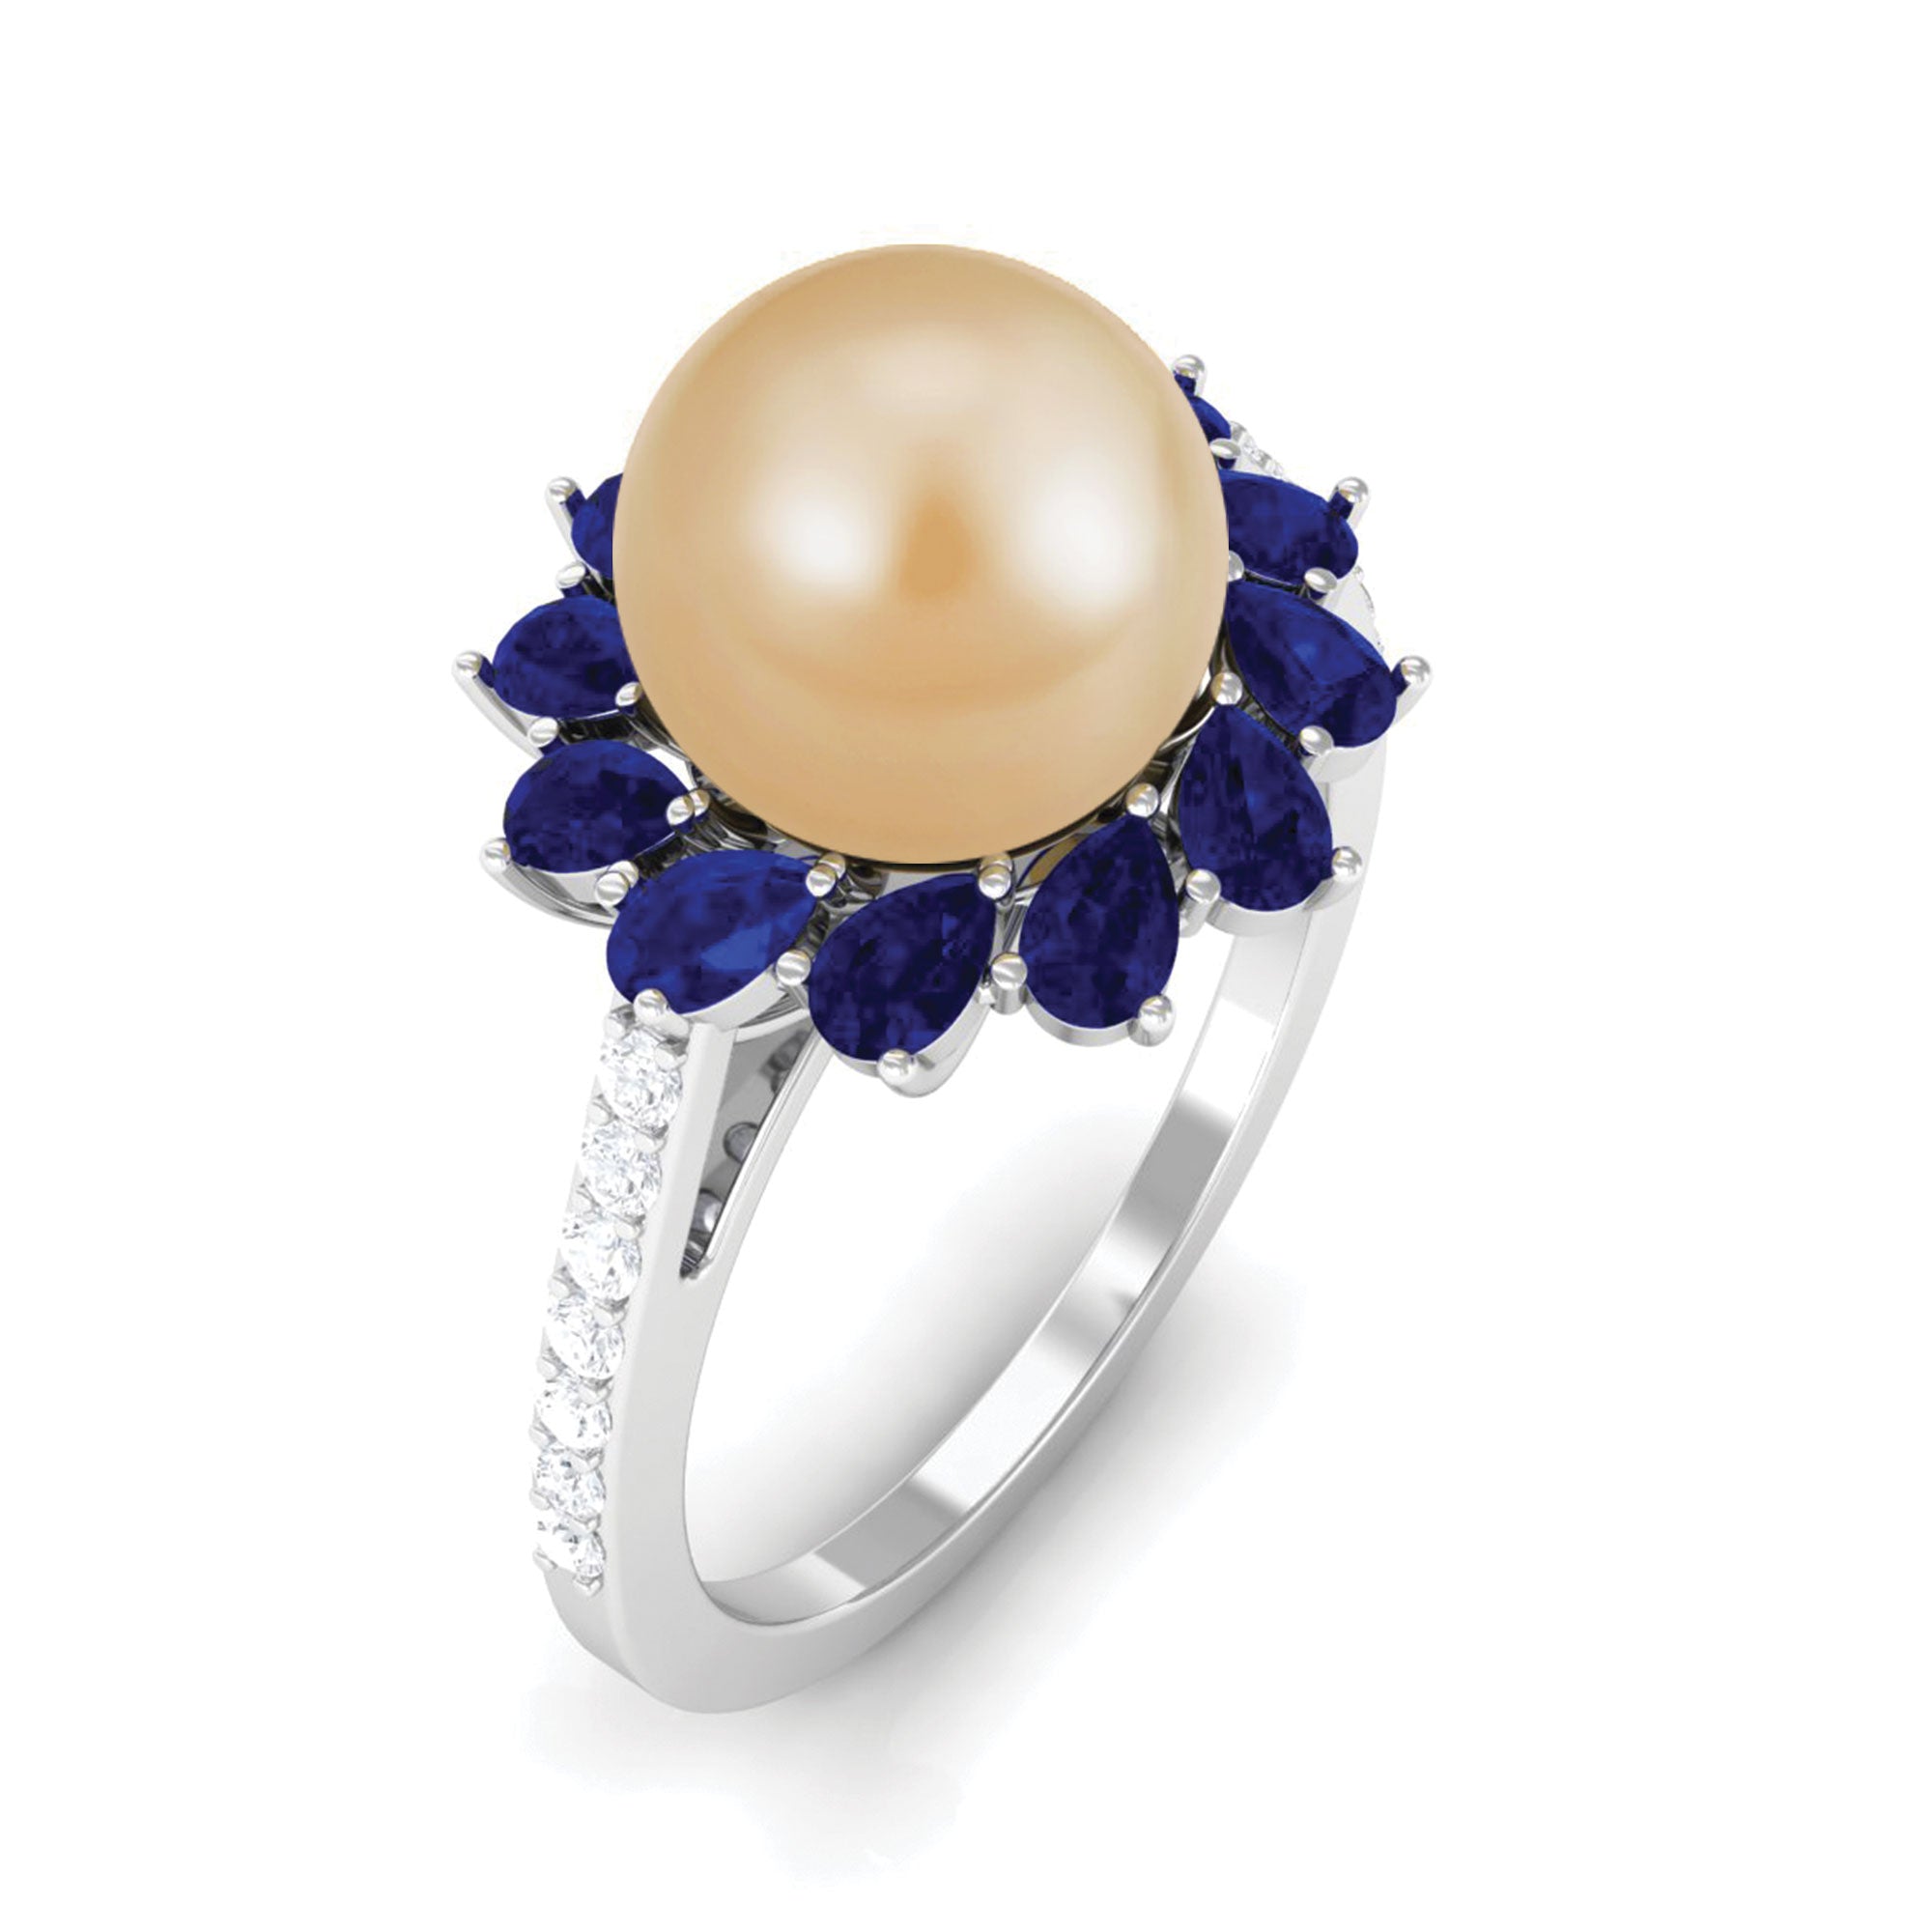 Golden South Sea Pearl Cocktail Halo Ring with Blue Sapphire South Sea Pearl-AAAA Quality - Arisha Jewels